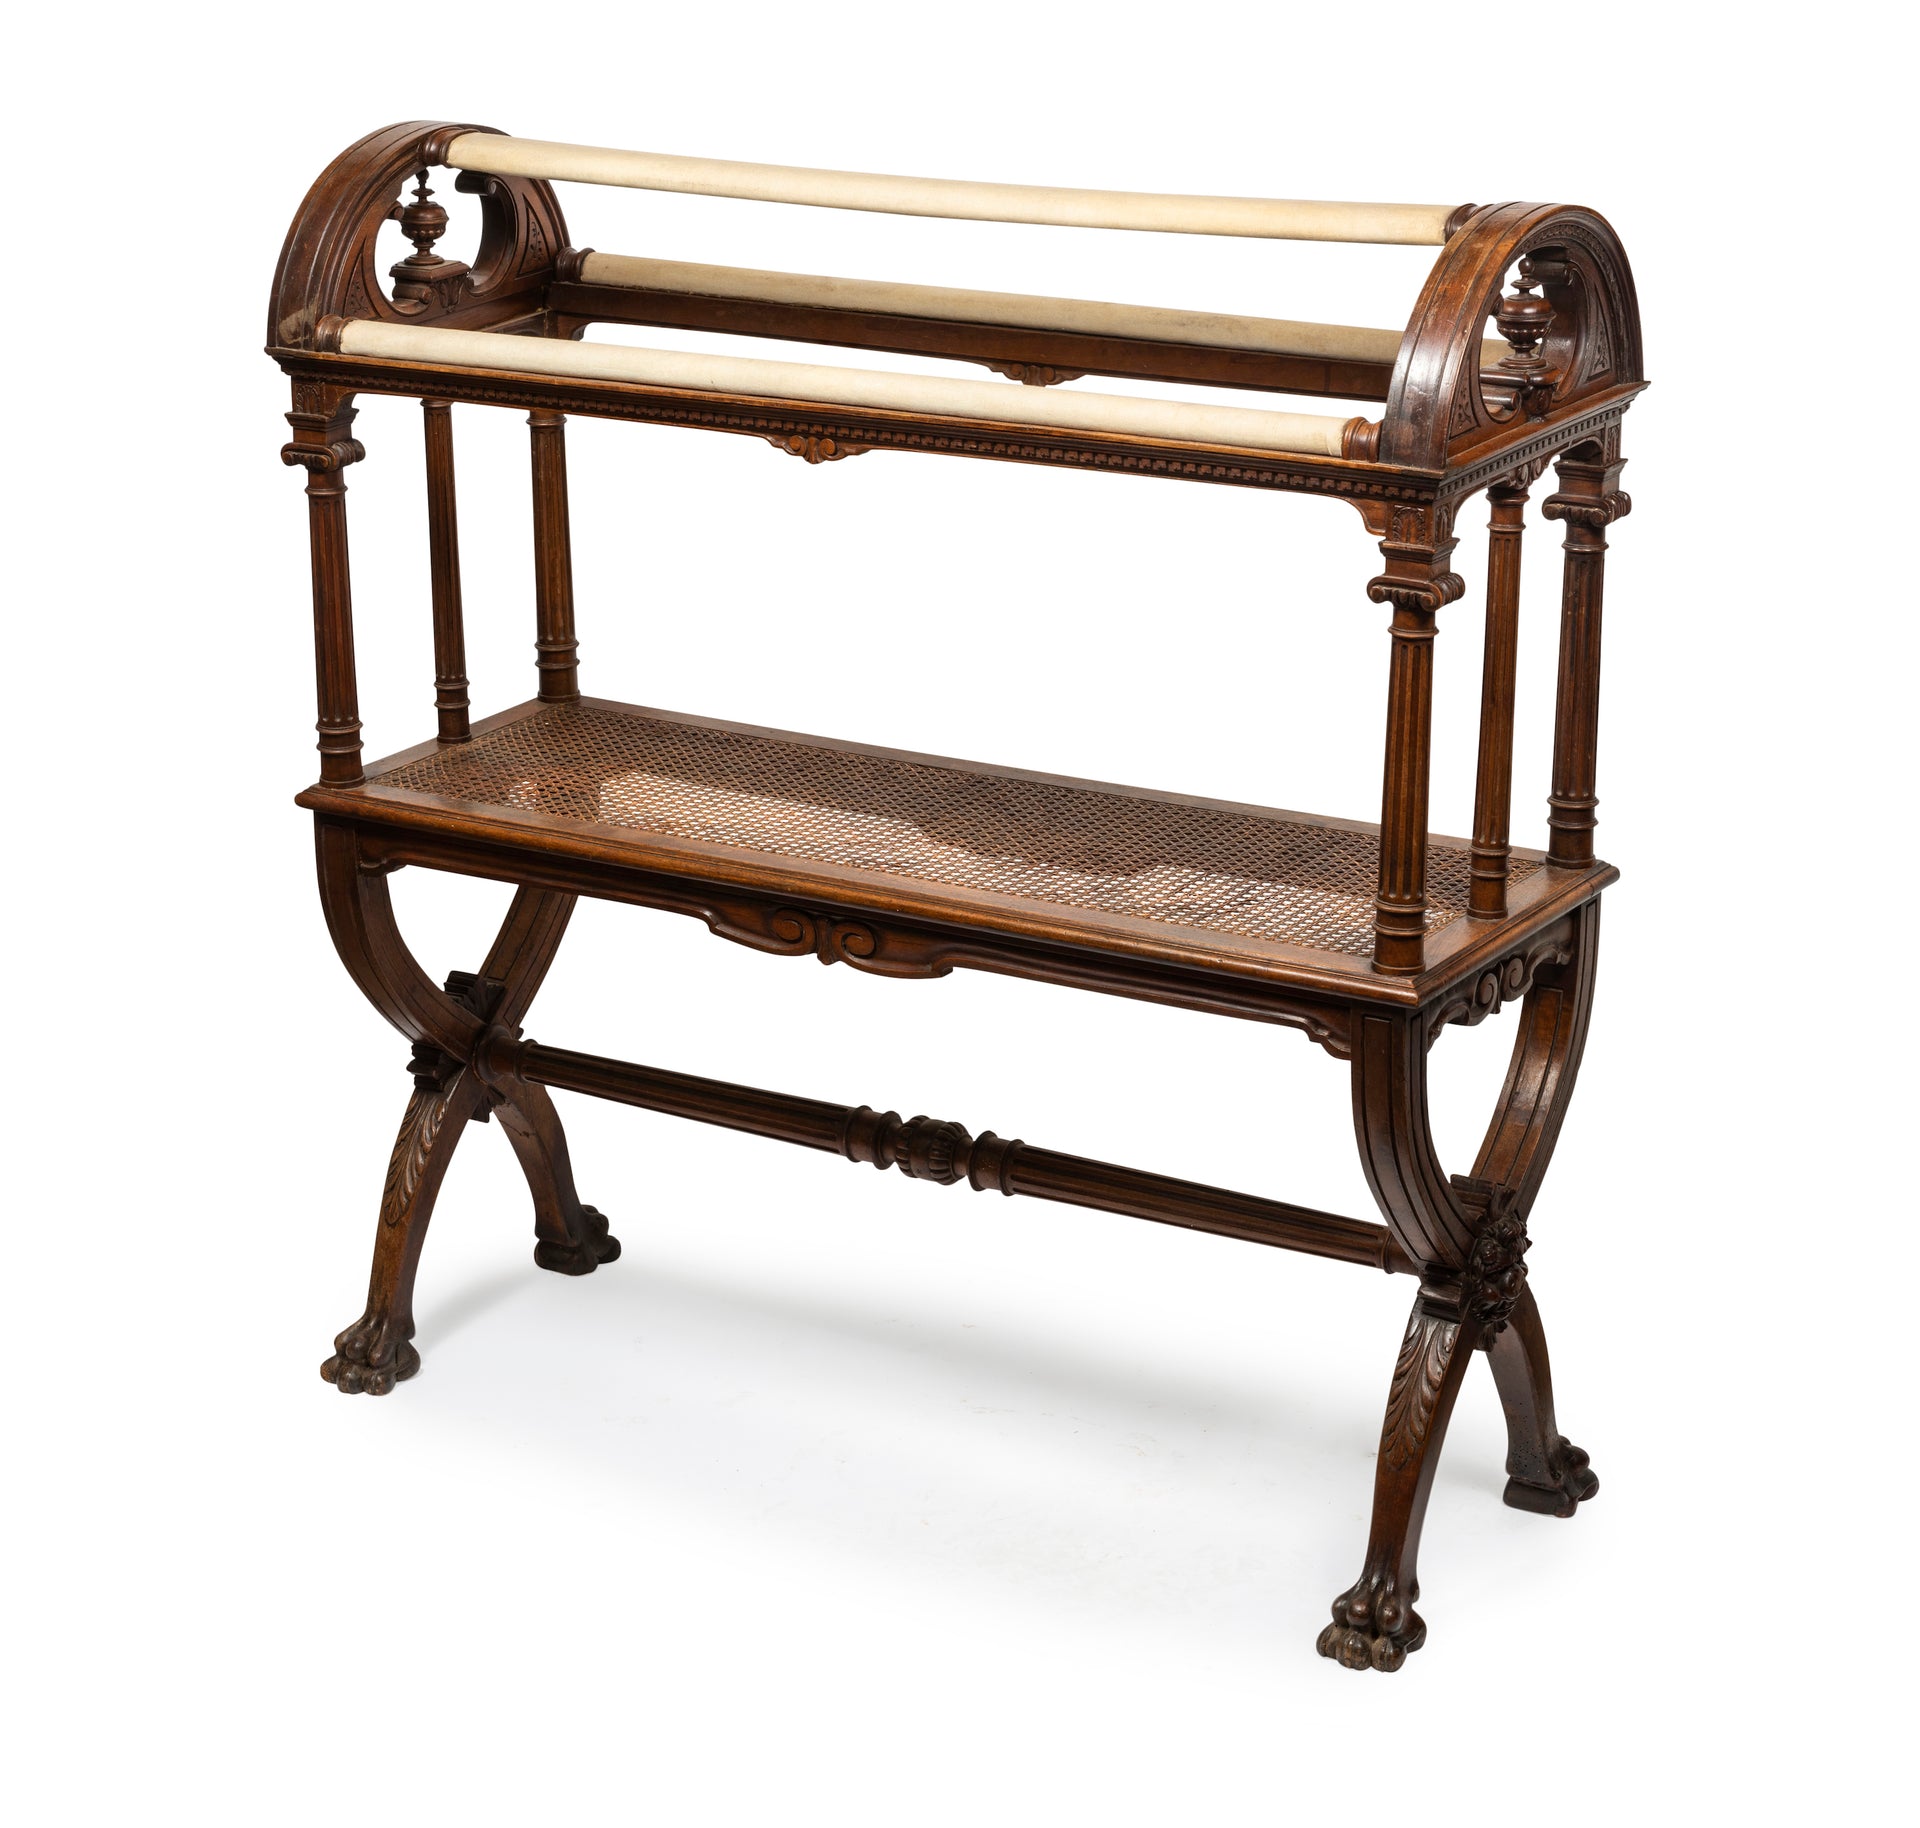 SOLD A rare carved walnut and caned saddle stand, English Circa 1880